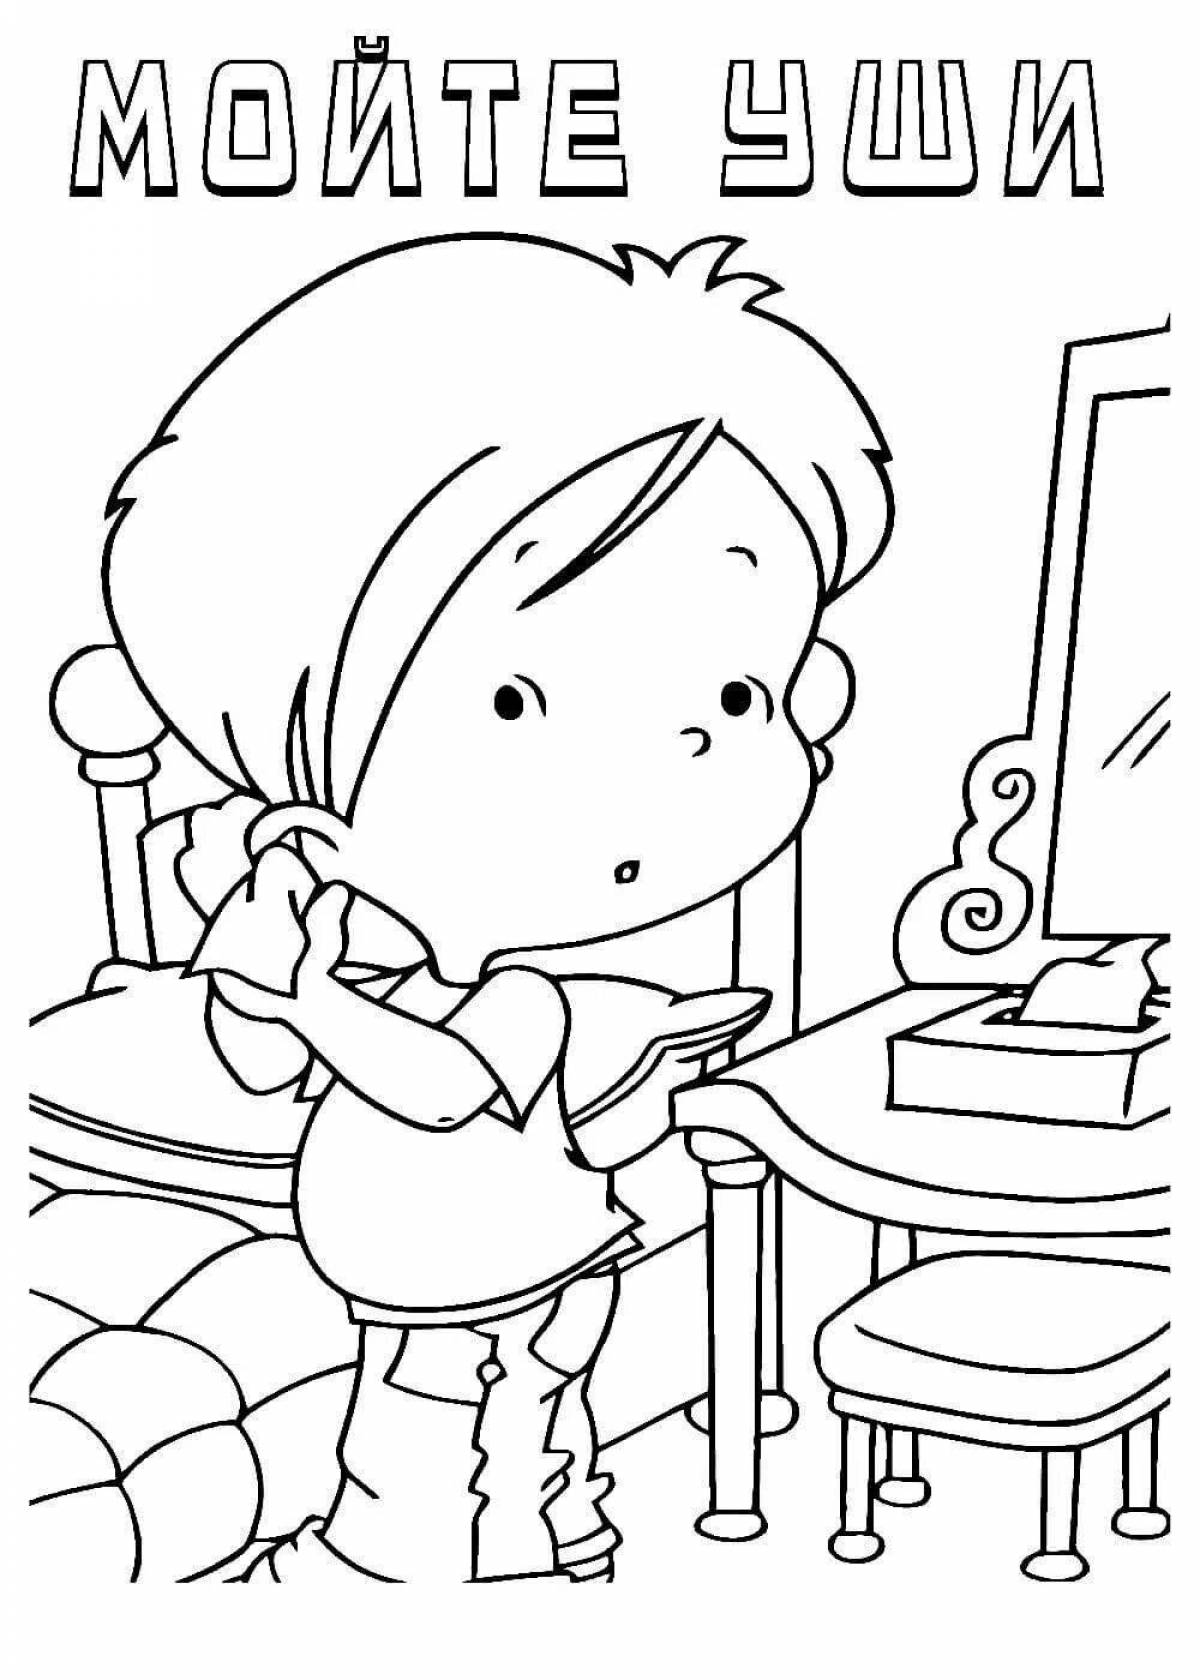 Colorful personal care coloring pages for kids